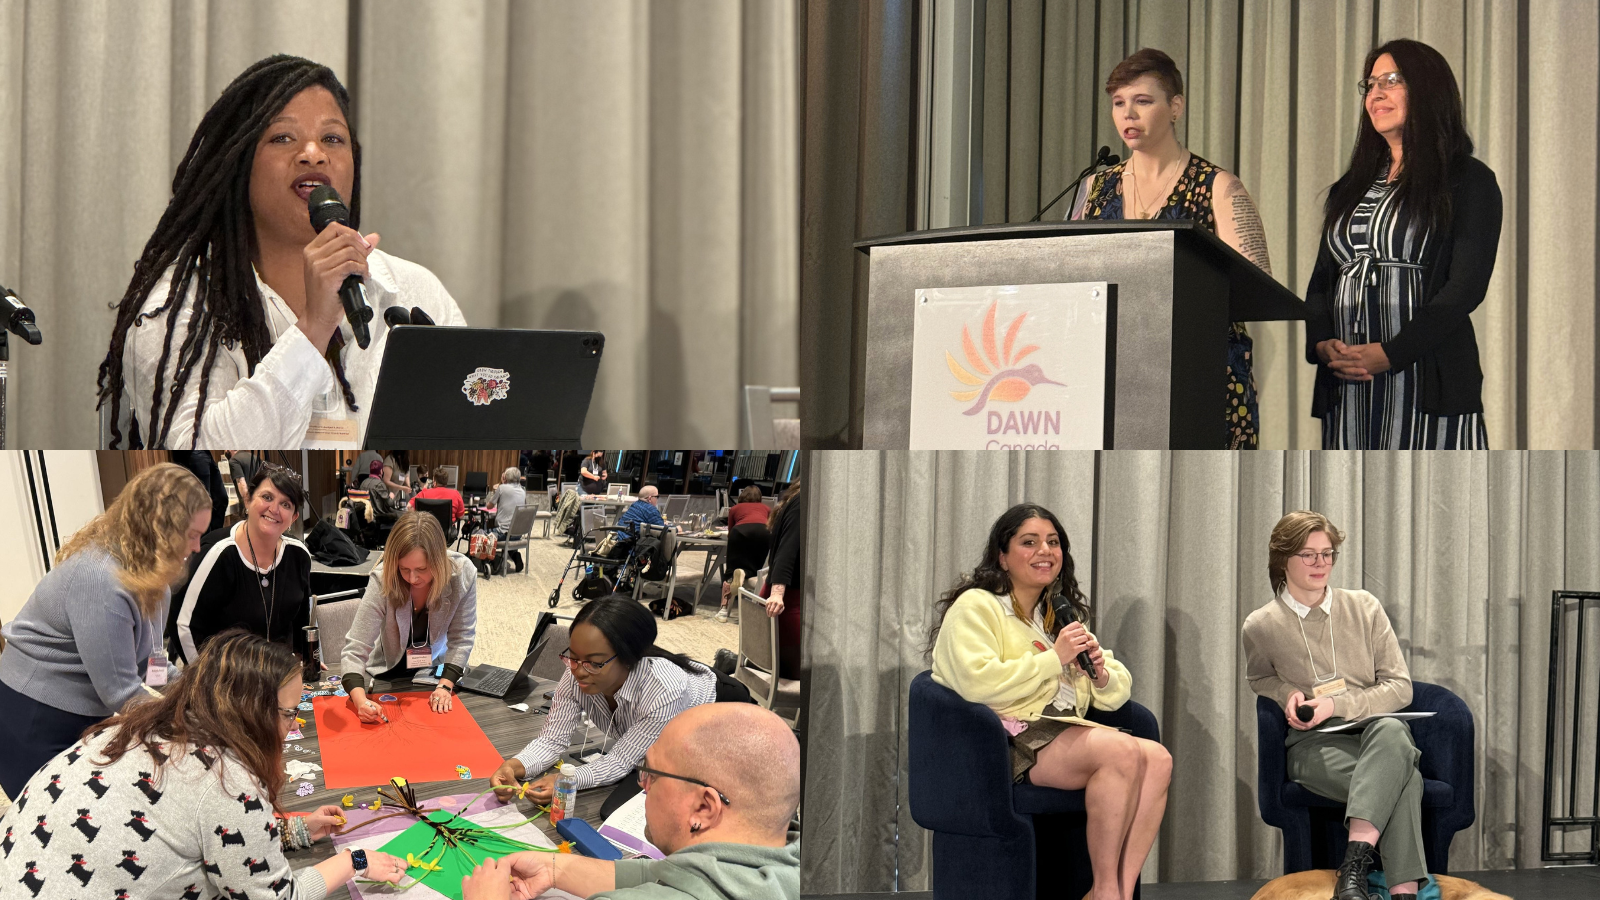 The image is a collage featuring 4 shots from DAWN's March event: on the top left corner, Tamara Angeline Medford Williams is speaking with a microphone in her hand; on the top right corner, a HFDC member is presenting at the podium; at the bottom left corner, a group engaging in a workshop activity around a table; and at the bottom right corner, Nashwa Khan and Erin Decker are presenting at the conference.